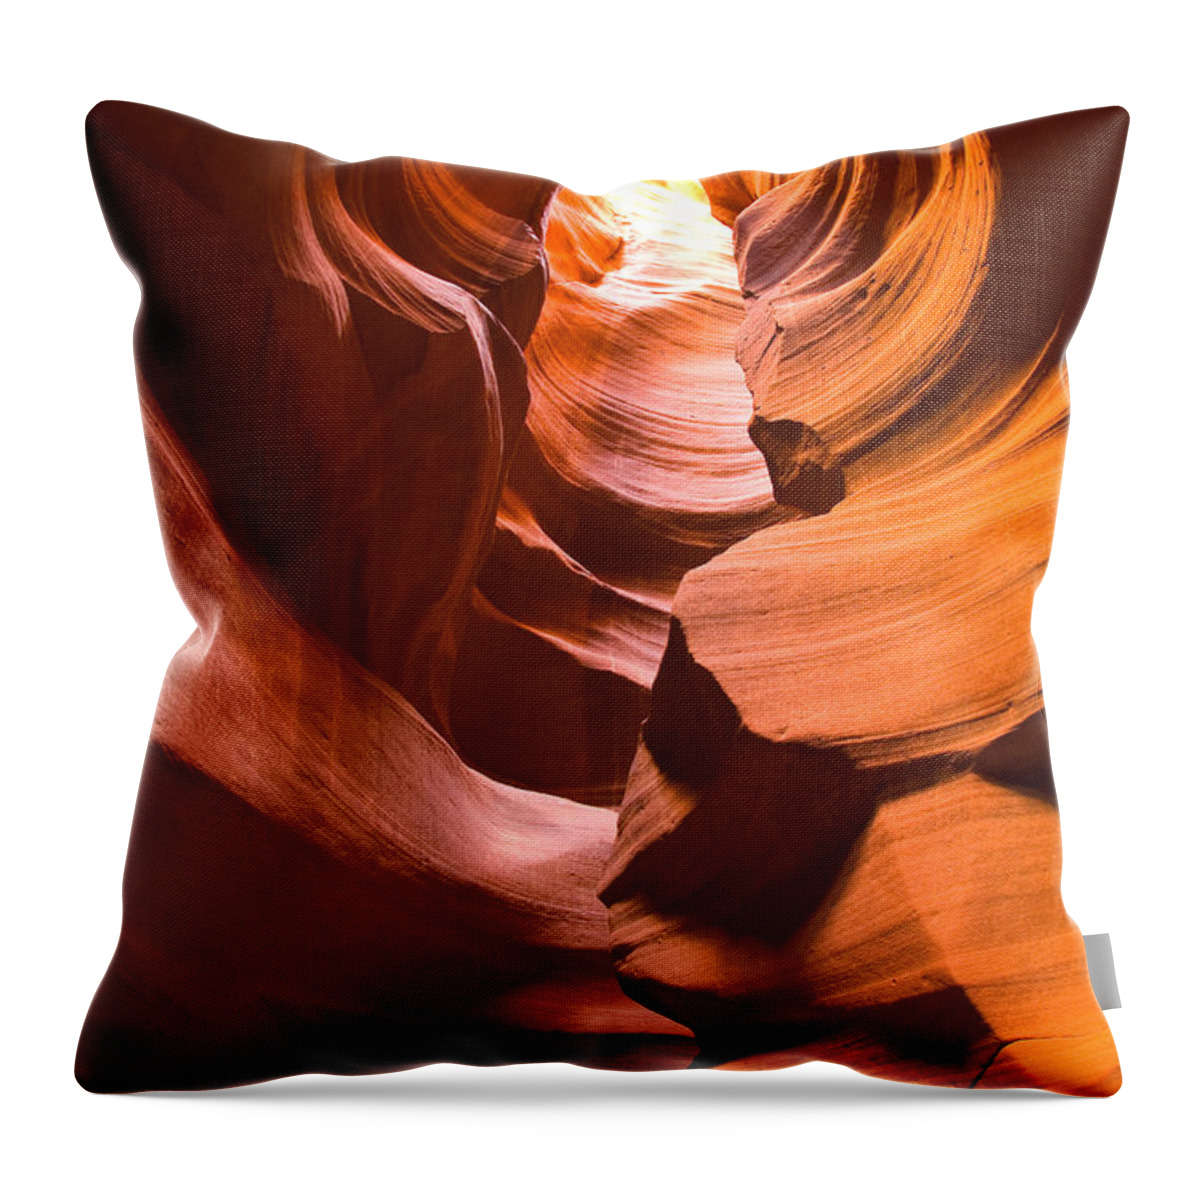 Antelope Canyon Throw Pillow featuring the photograph Antelope Canyon by Harry Spitz